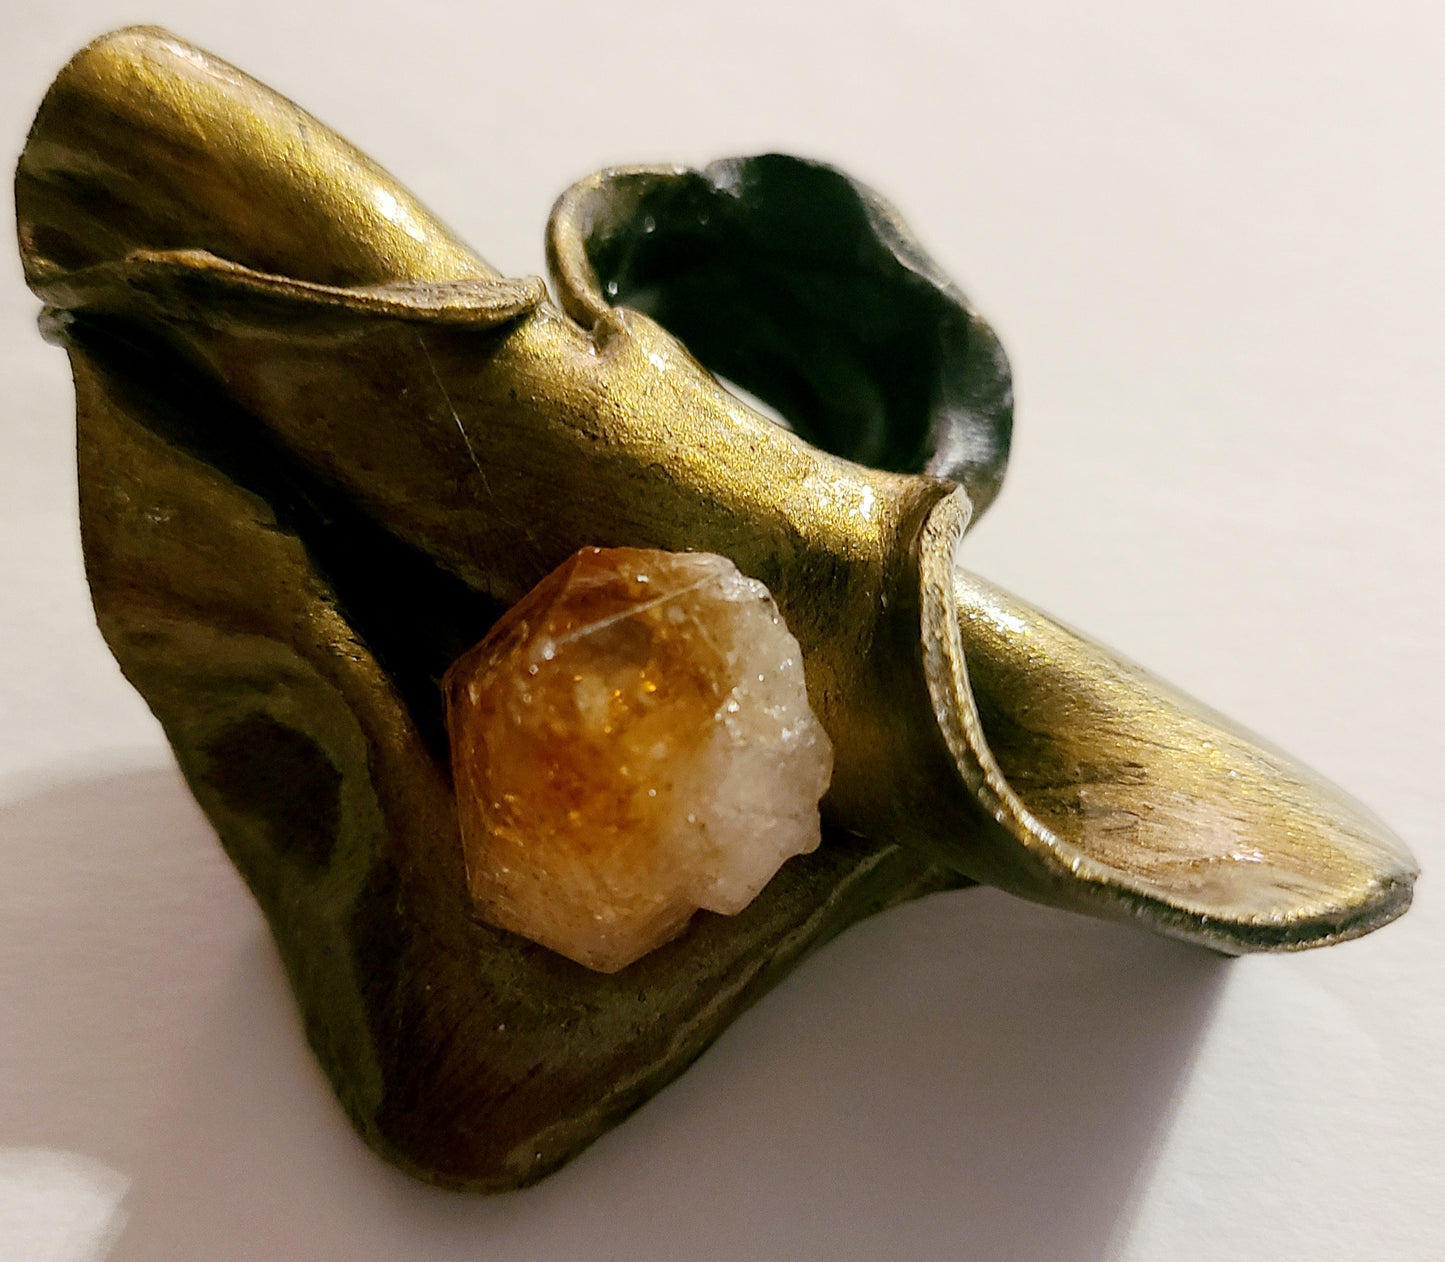 Rough Citrine Crystal In Sensuous Sculpted Bronze Statement Ring Size 8-9, Artisan Gemstone Cocktail Ring, Showstopper Jewelry Porn